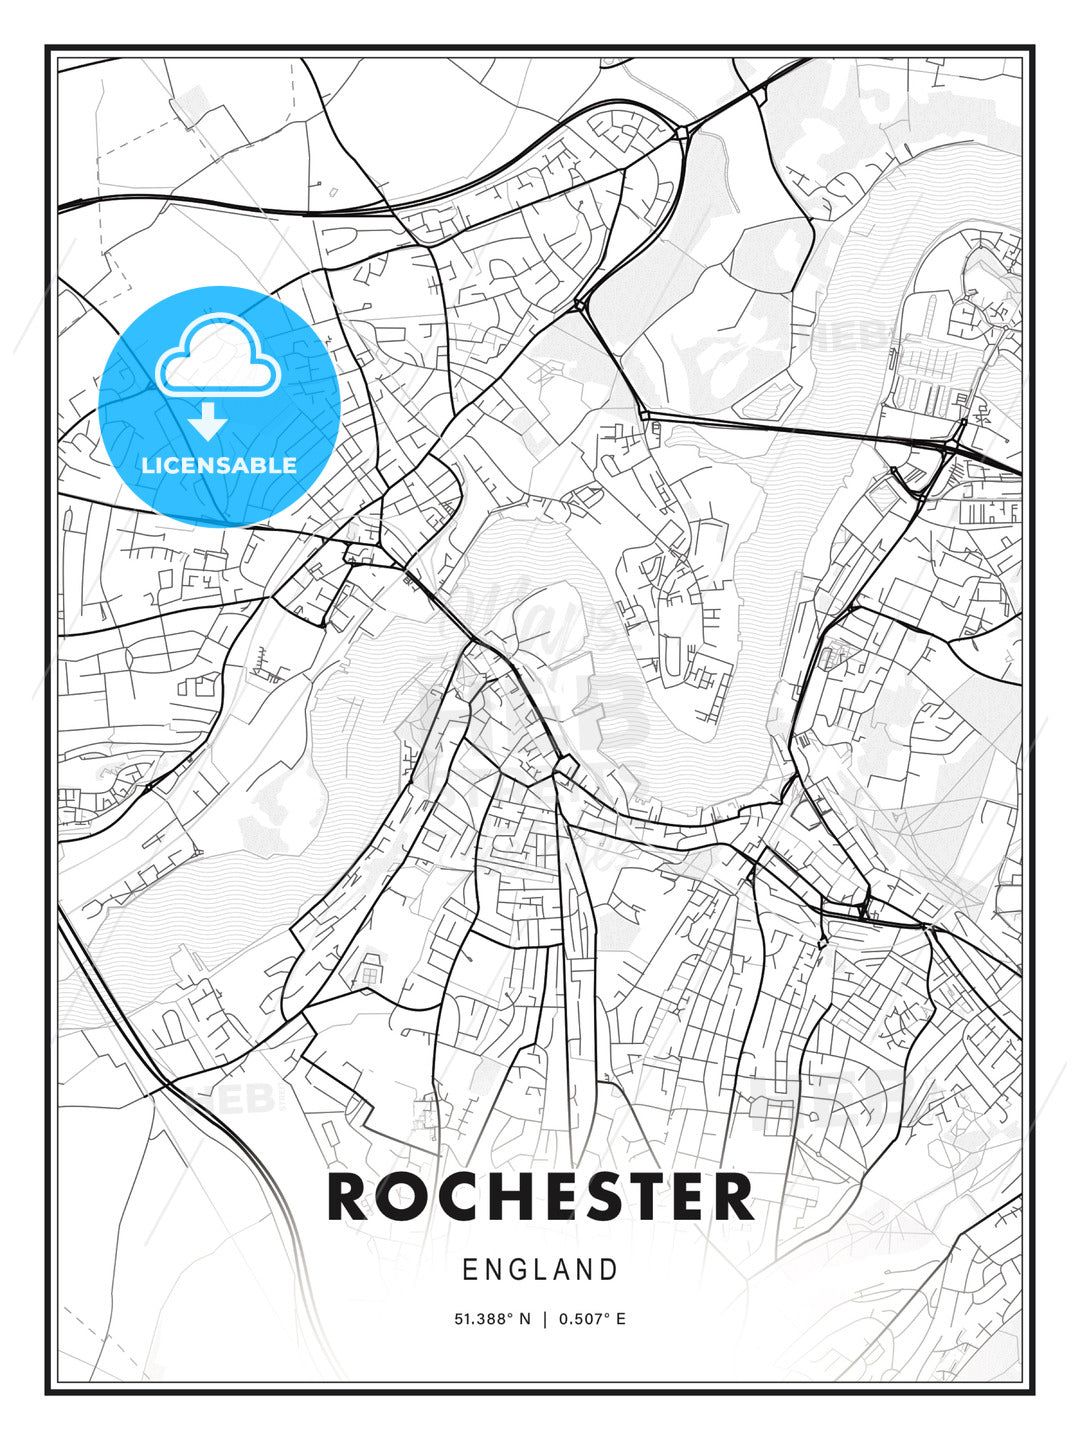 Rochester, England, Modern Print Template in Various Formats - HEBSTREITS Sketches